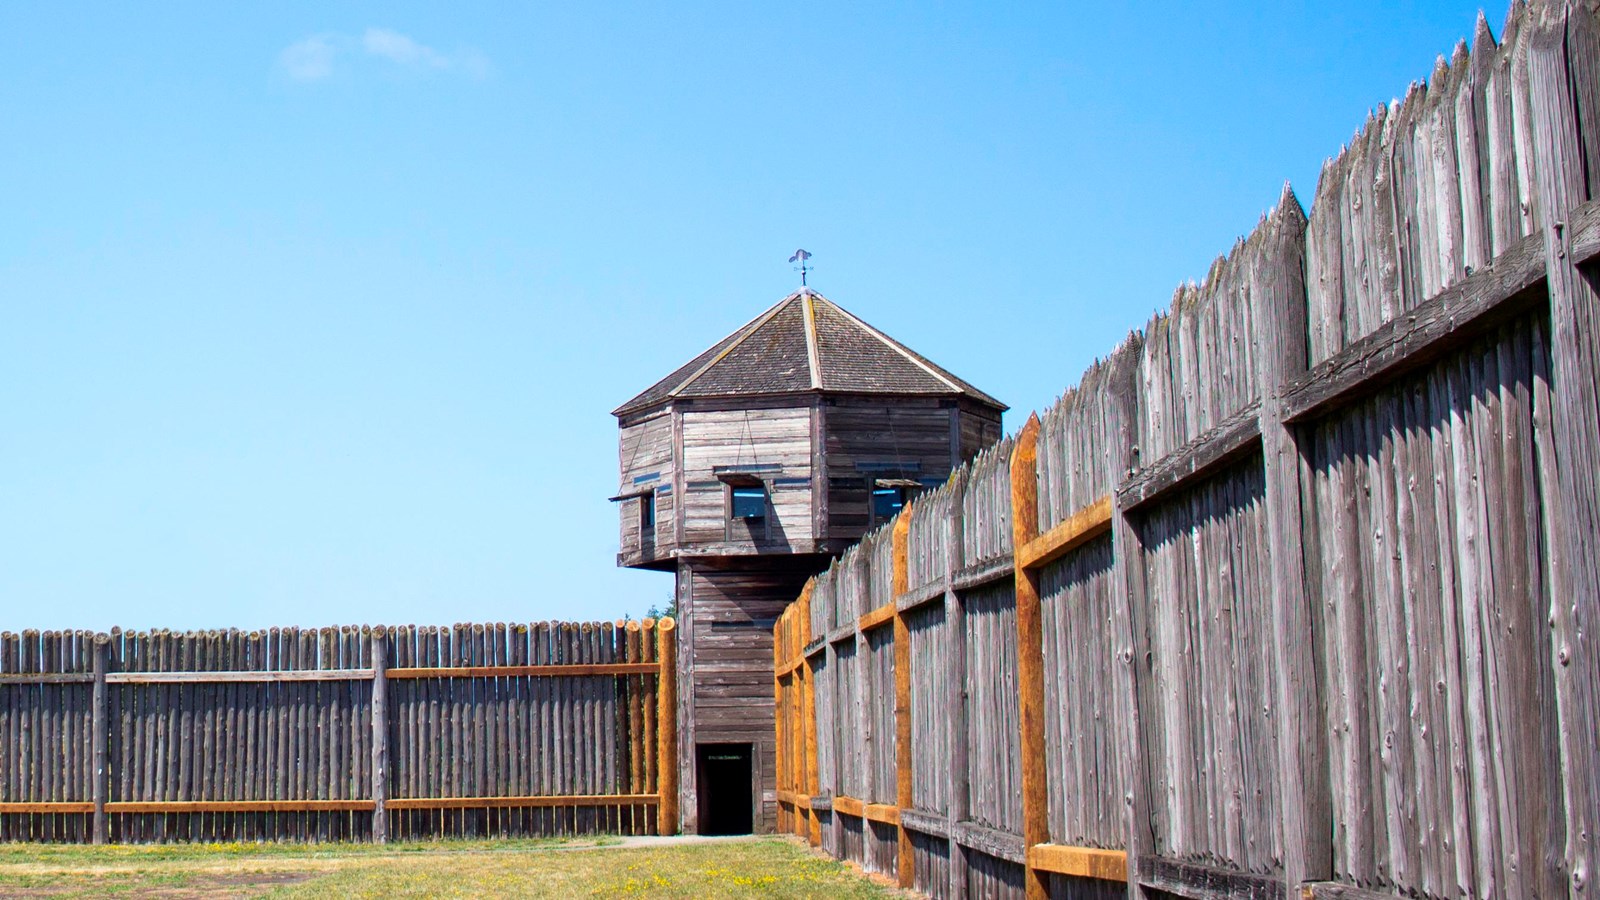 The three-story bastion tower at the corner of the fort\'s wooden palisade walls.